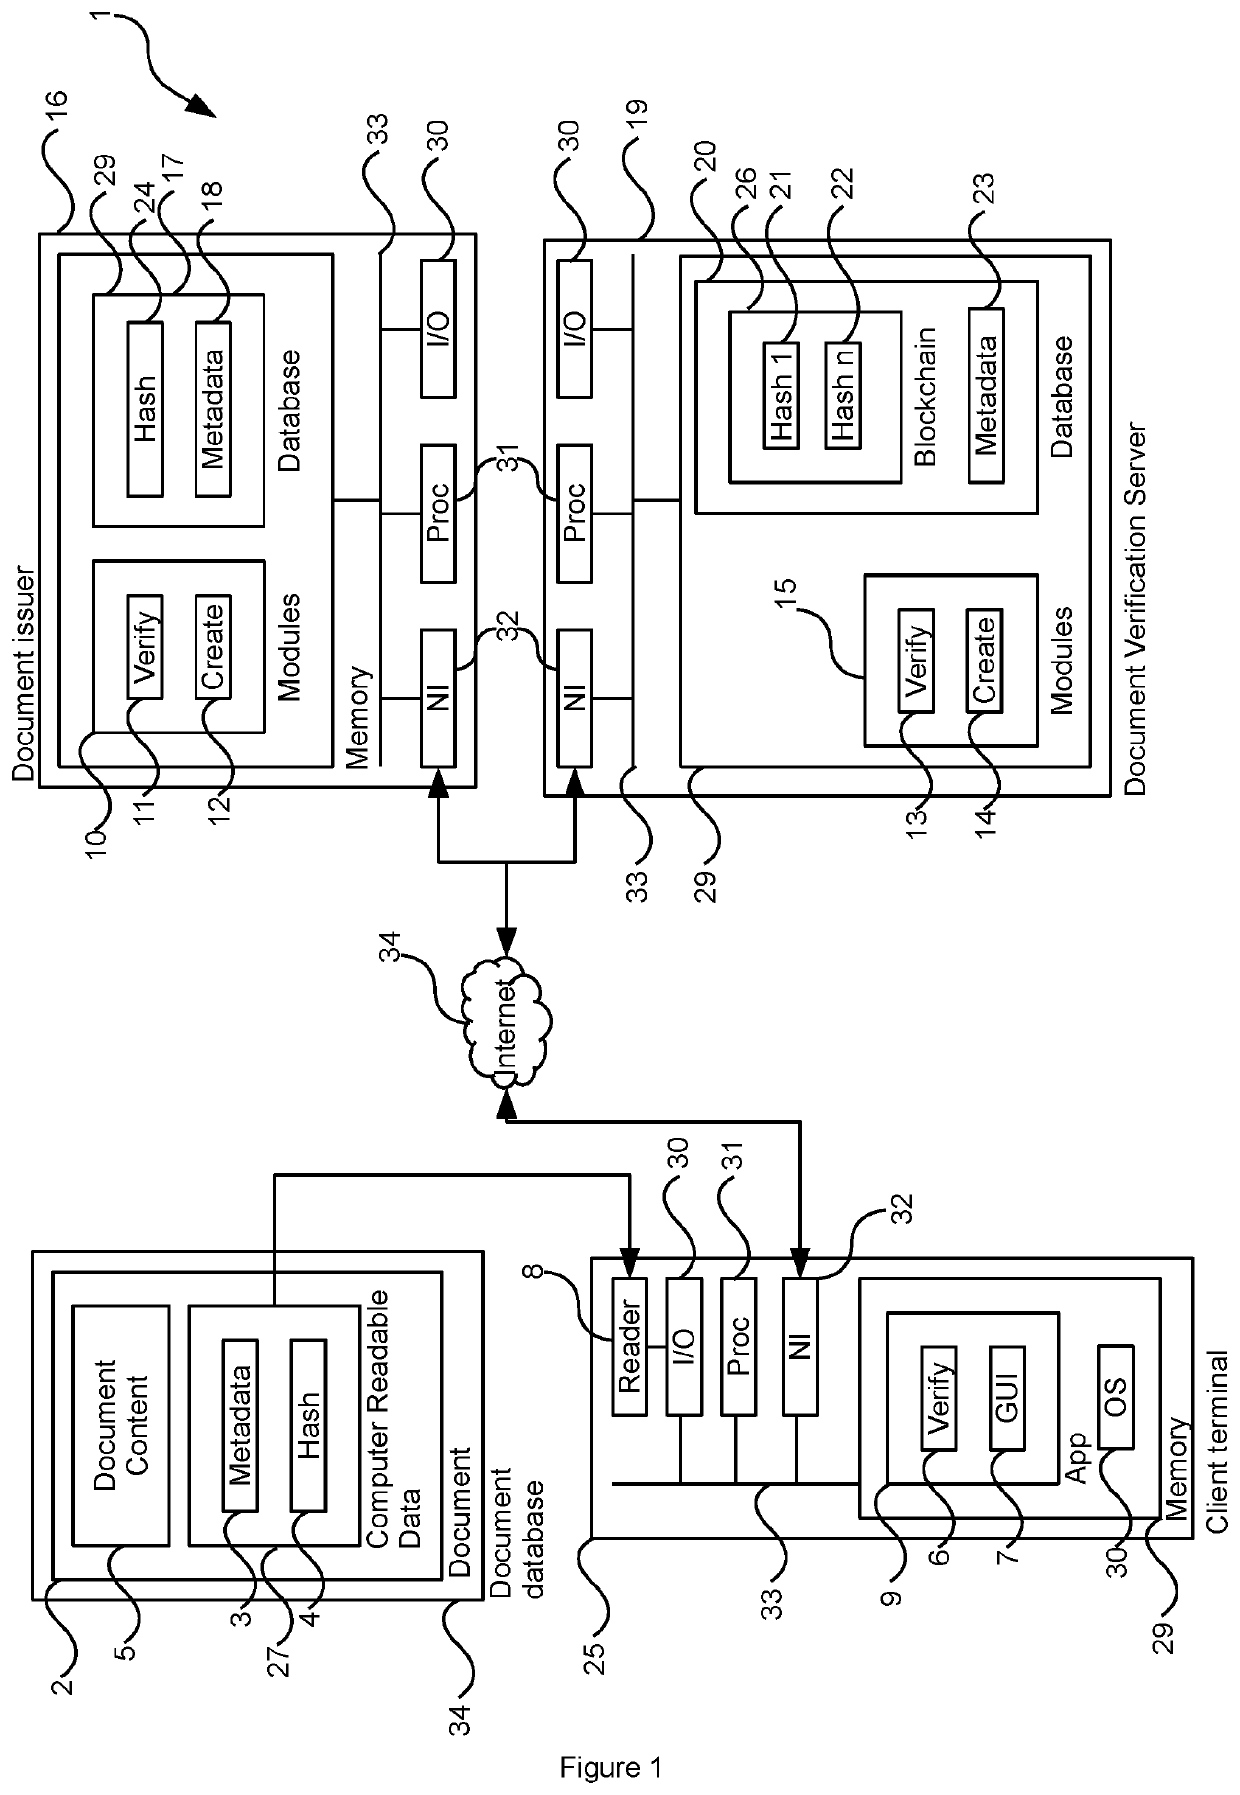 System and method for document information authenticity verification